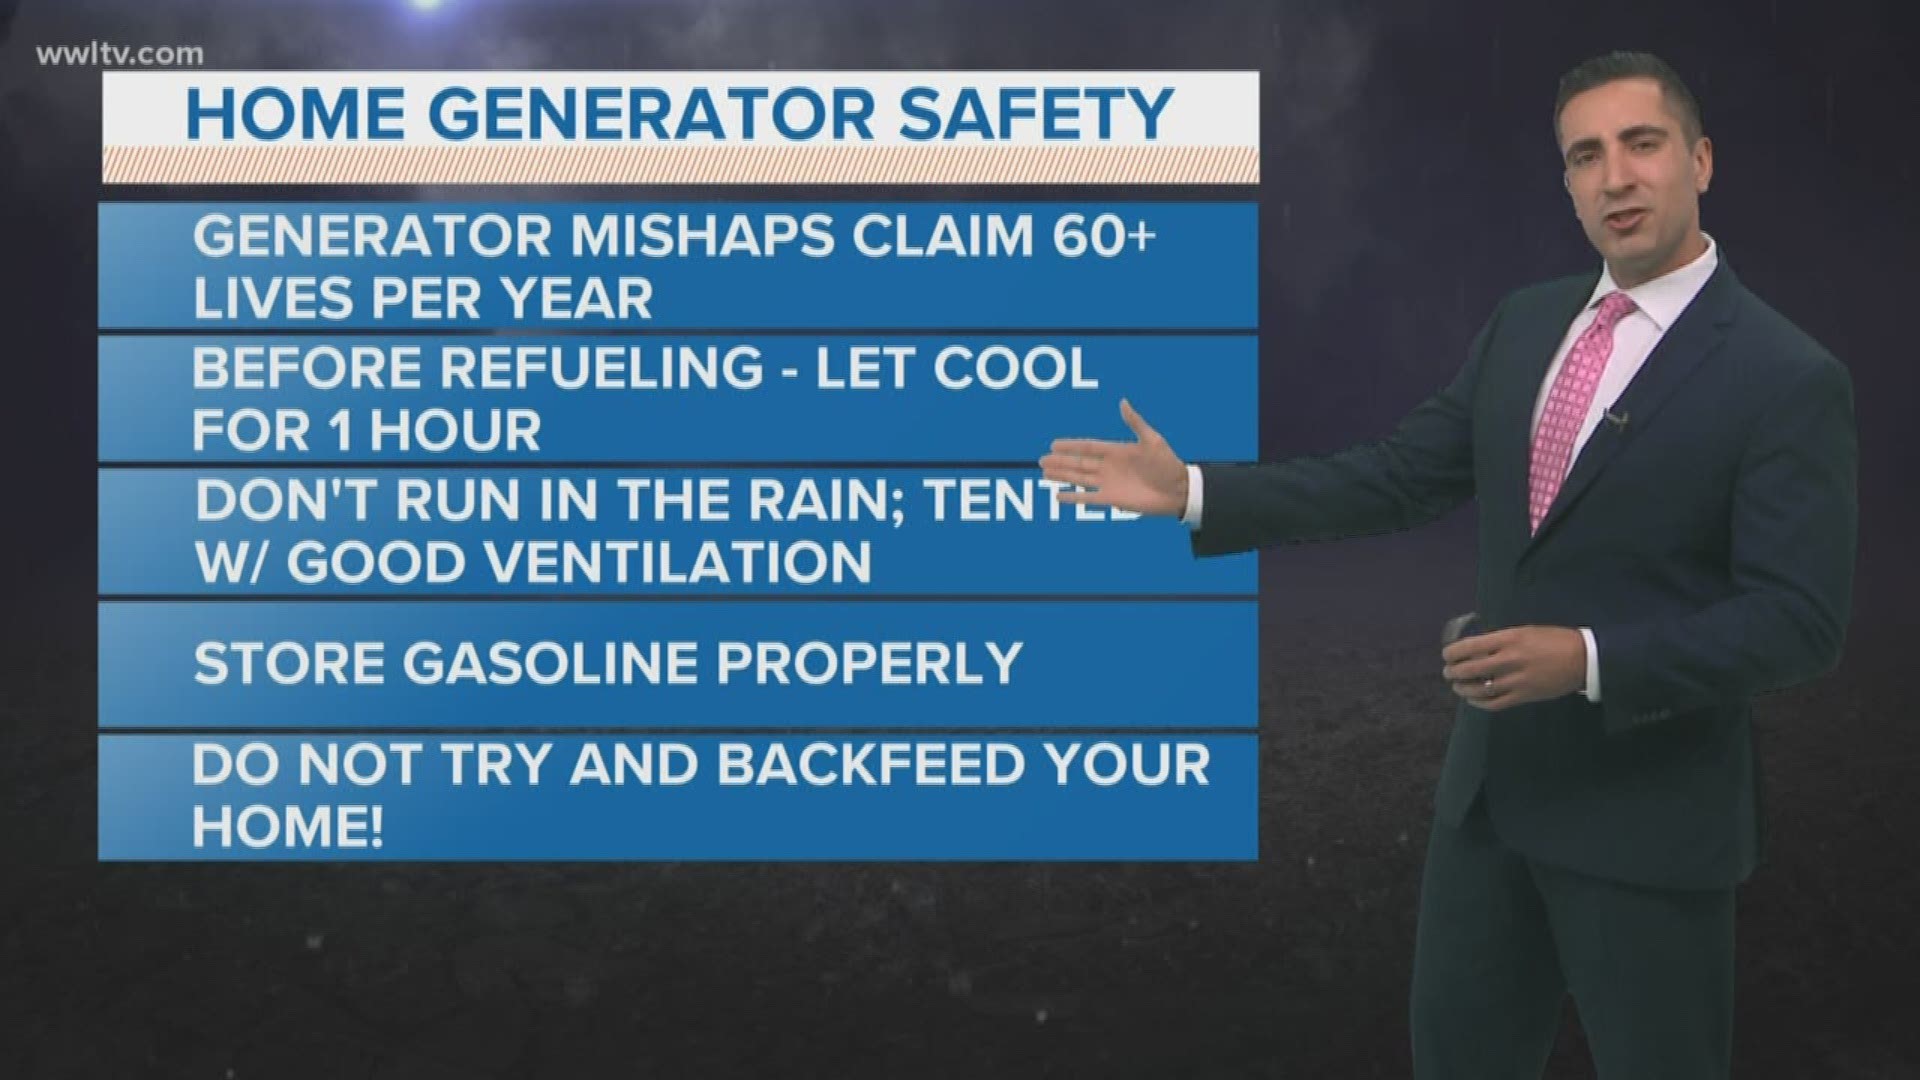 Things to be mindful of when using a generator during or after a storm.